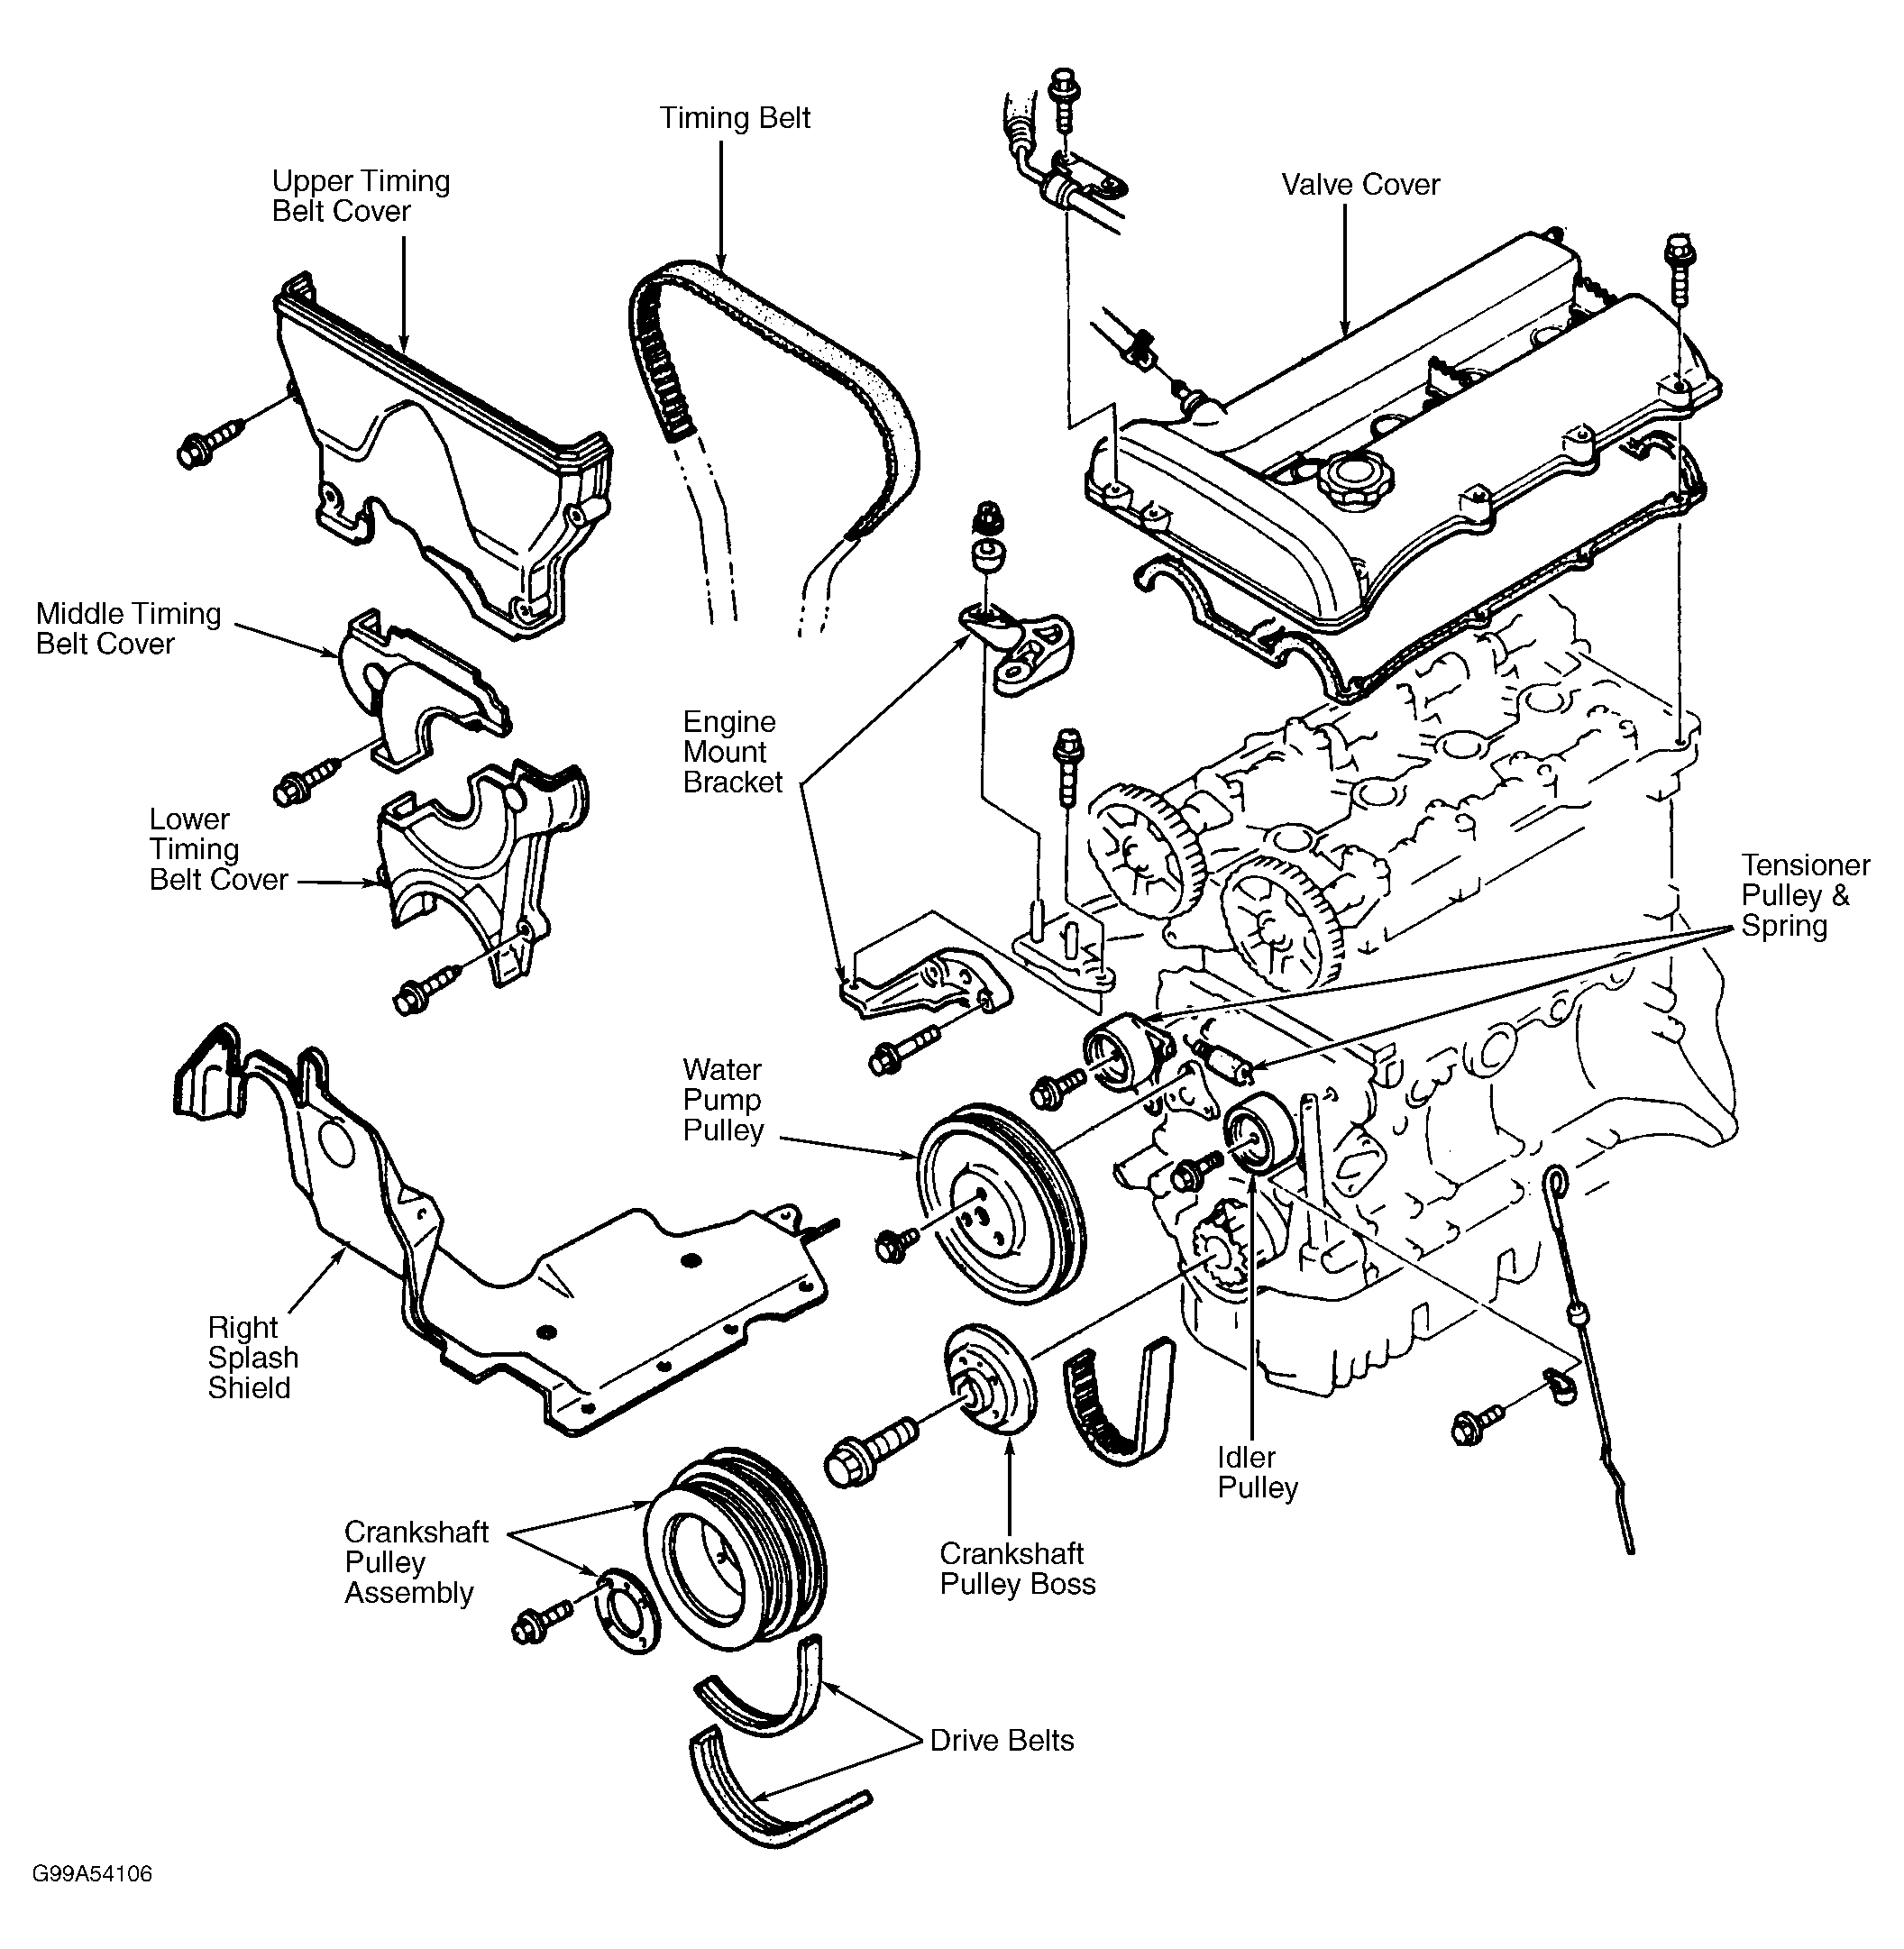 1998 Mazda Protege Serpentine Belt Routing and Timing Belt Diagrams